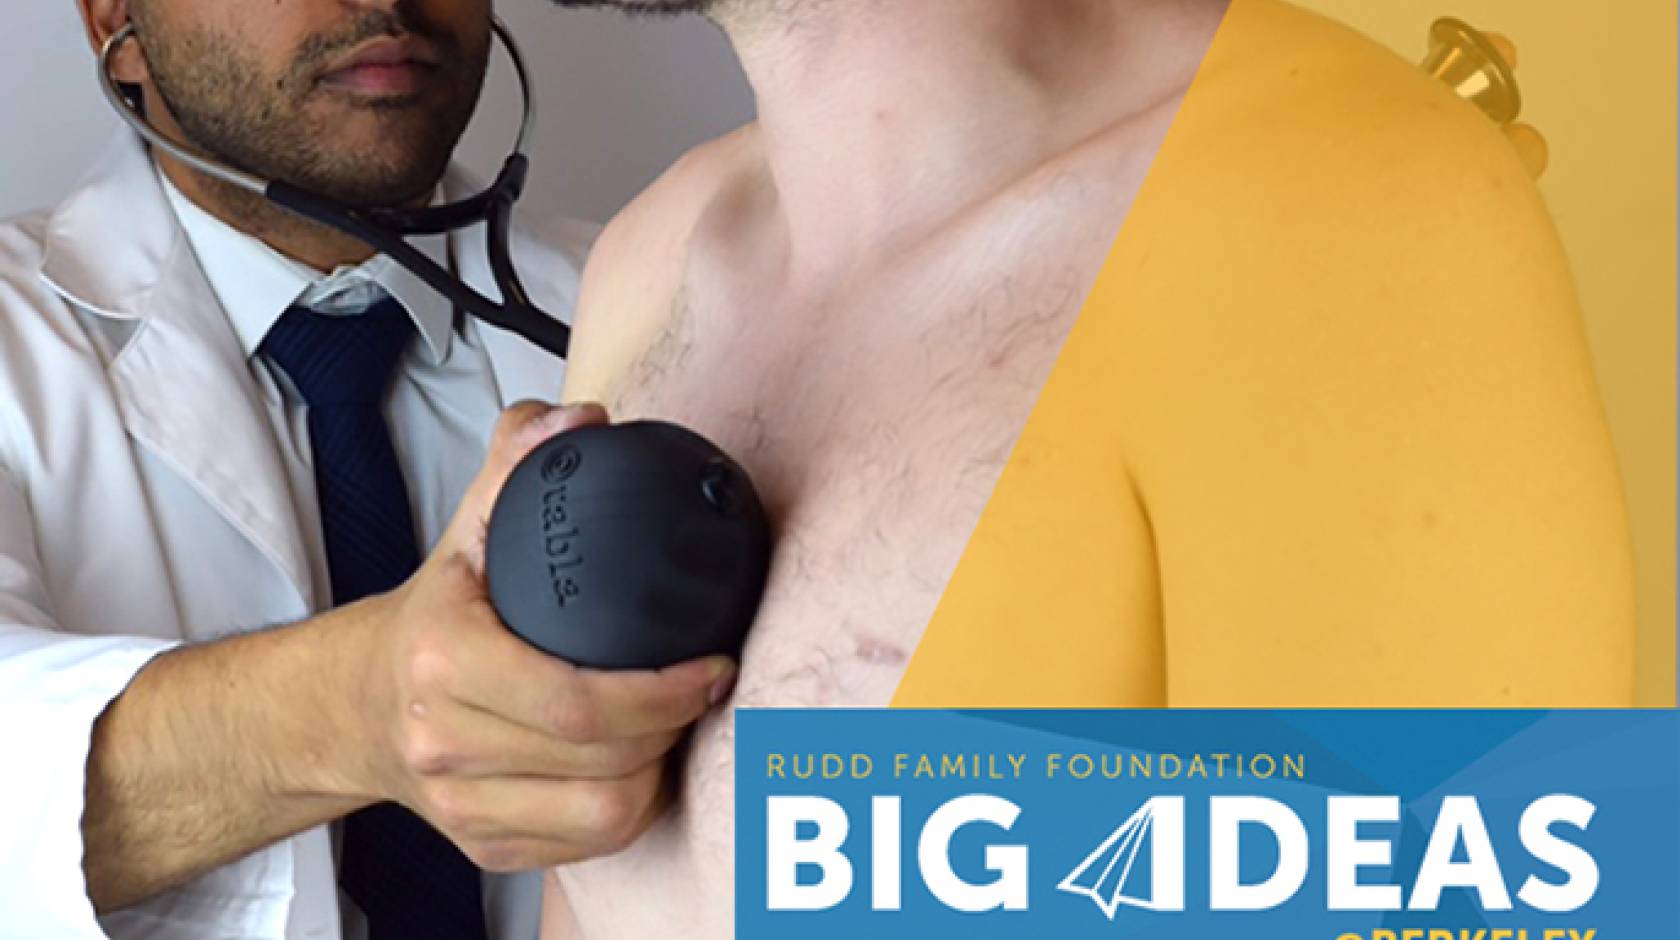 The team that created Tabla, a device that detects pneumonia using sound waves and a stethoscope, received seed funding from Big Ideas@Berkeley to support its project.